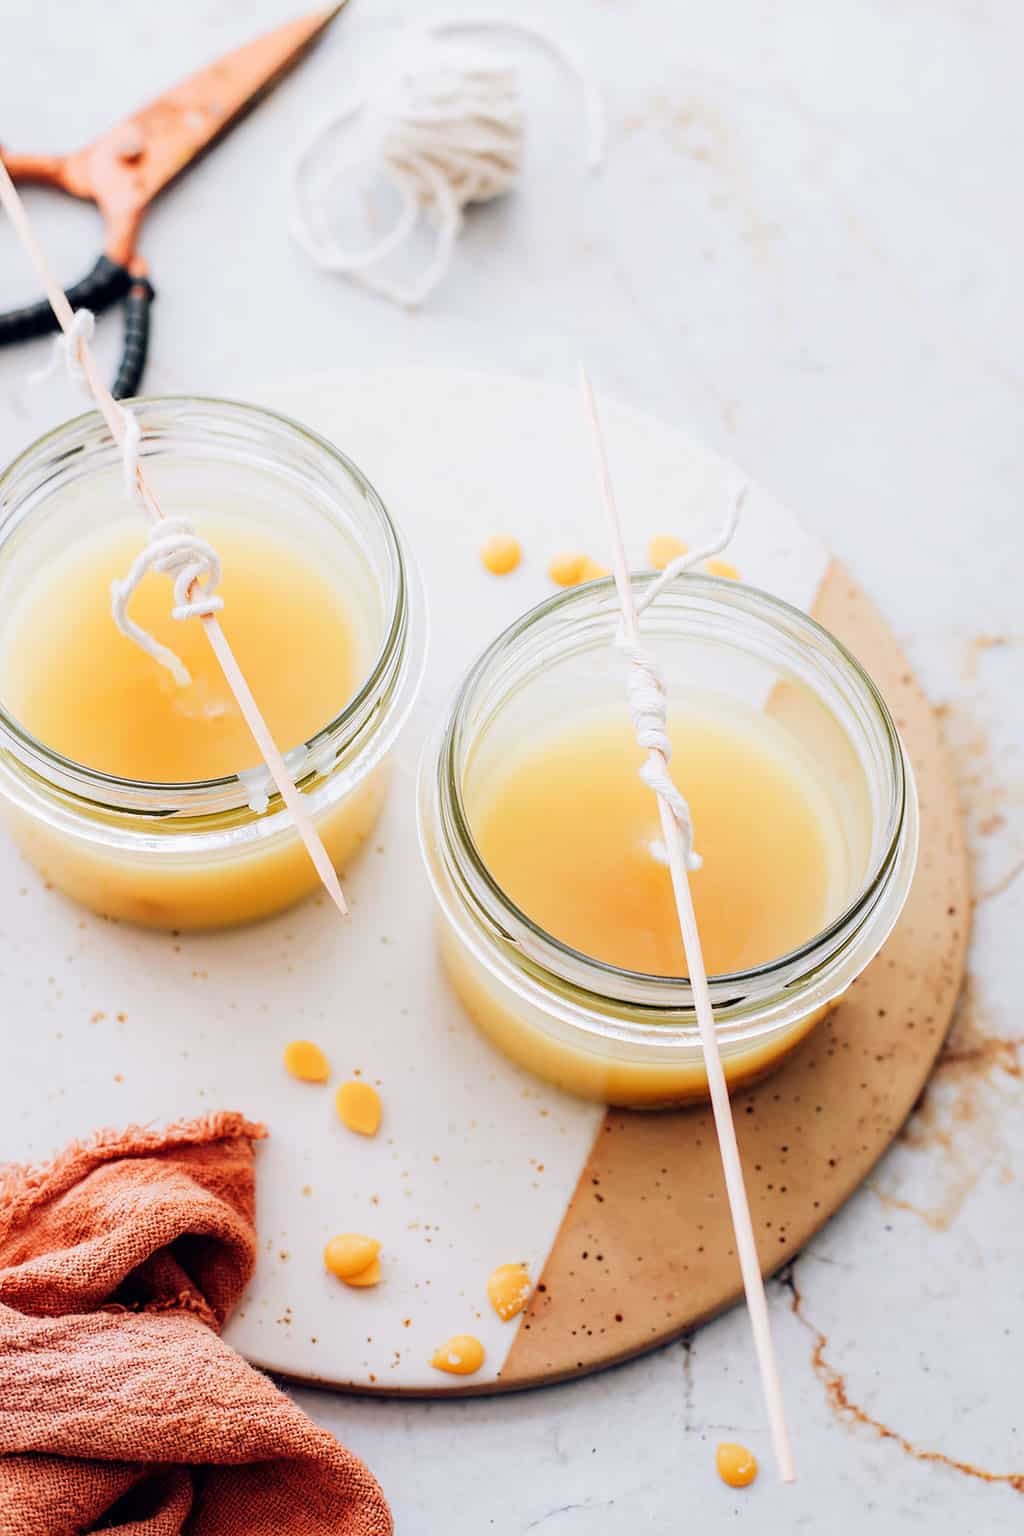 Easy DIY Beeswax Candles in the oven